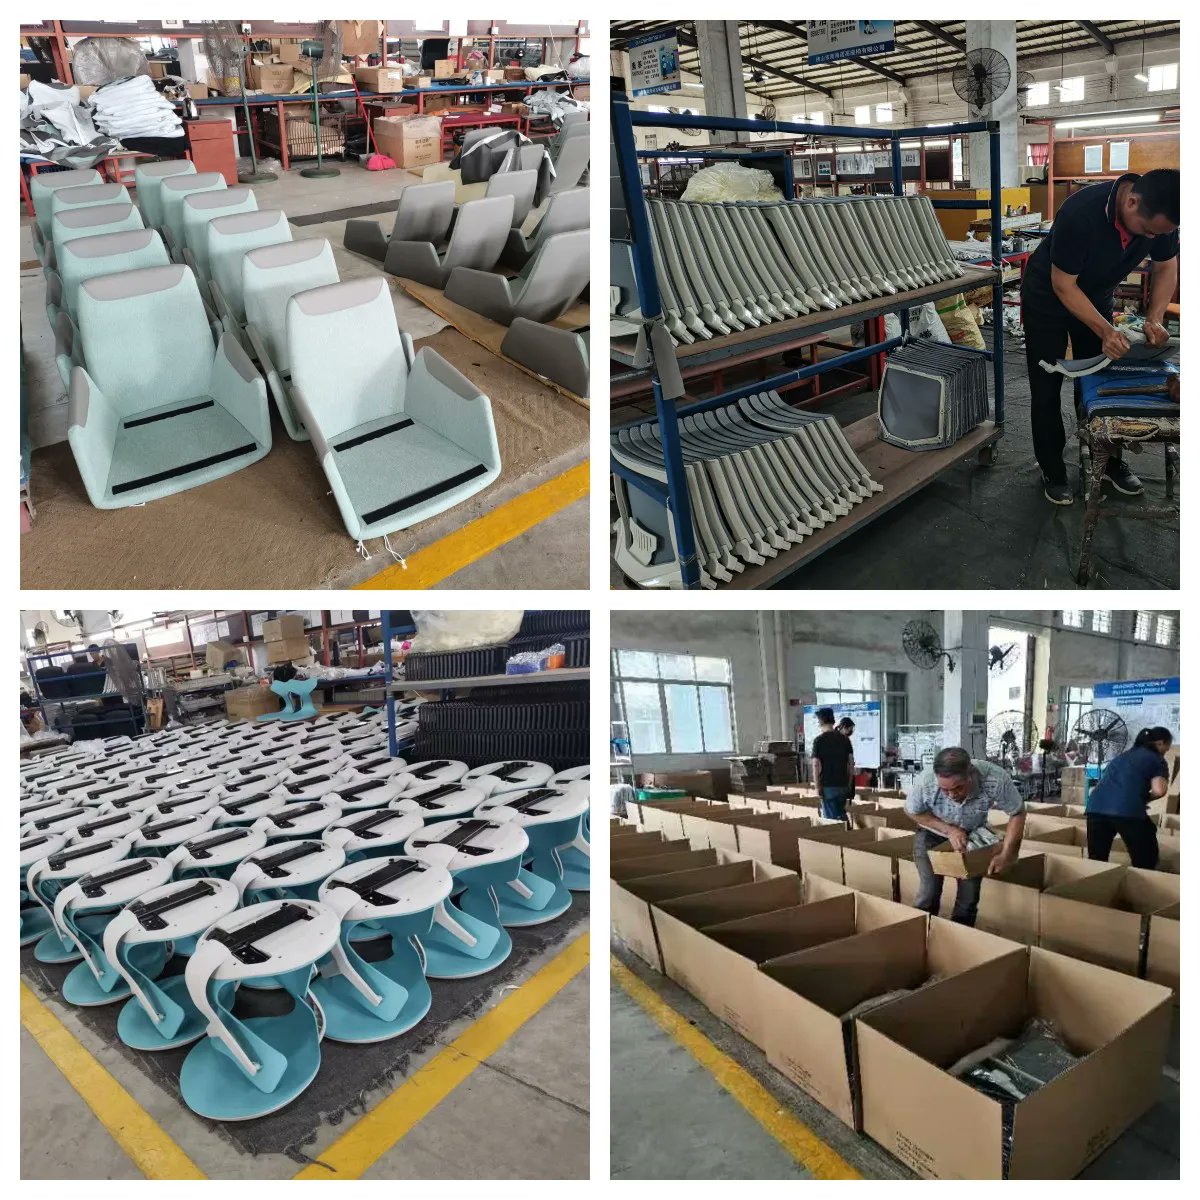 We spent almost one month, getting the satisfied seating. Customized products after confirmed by the client, are in mass production now and ready to ship out. 

#officefurniture #schoolfurniture #officedesign#ergonomicchair #ergonomic#workingspace #officespace #officespcace